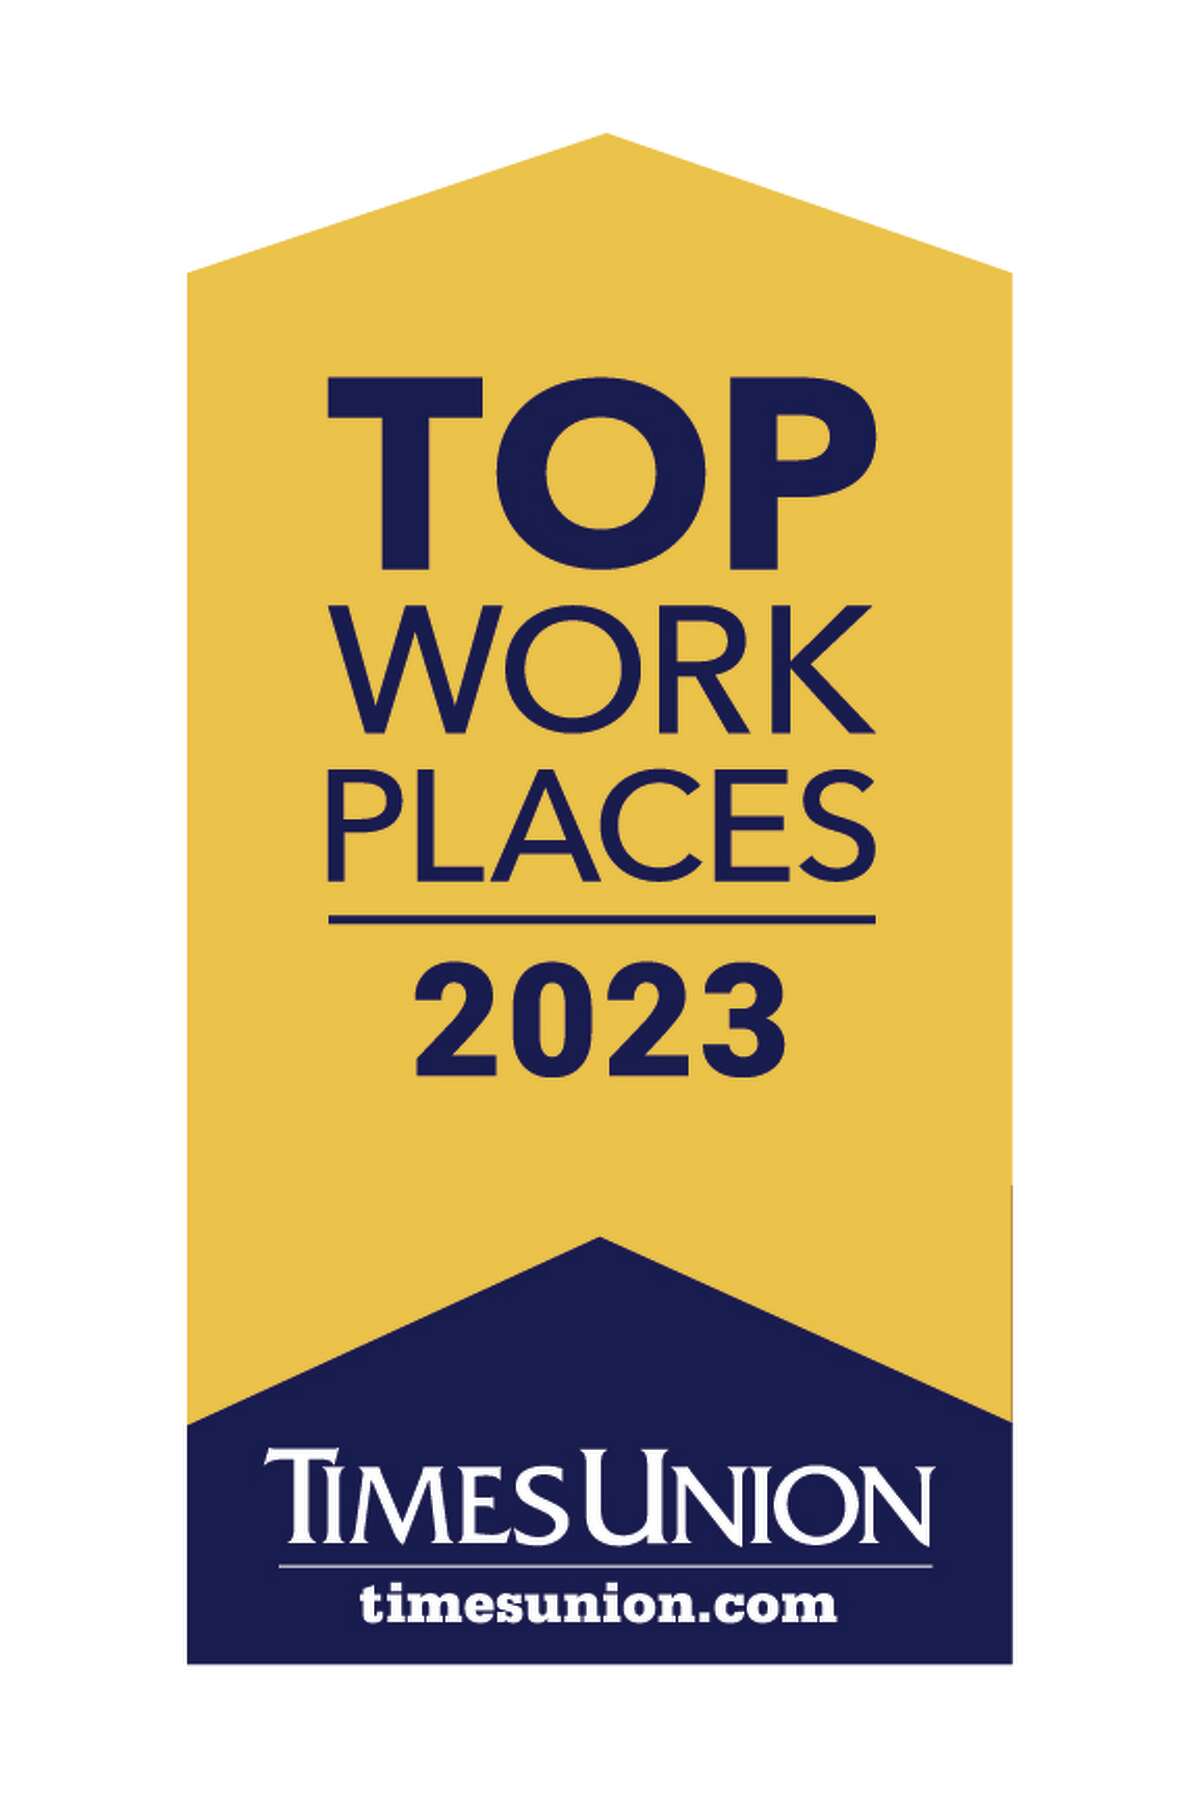 The Times Union is accepting nominations now for 2023 Top Workplaces consideration. Nominate your business or employer at  https://www.timesunion.com/nominate or call 518-636-0132. The nomination deadline is Dec. 2.